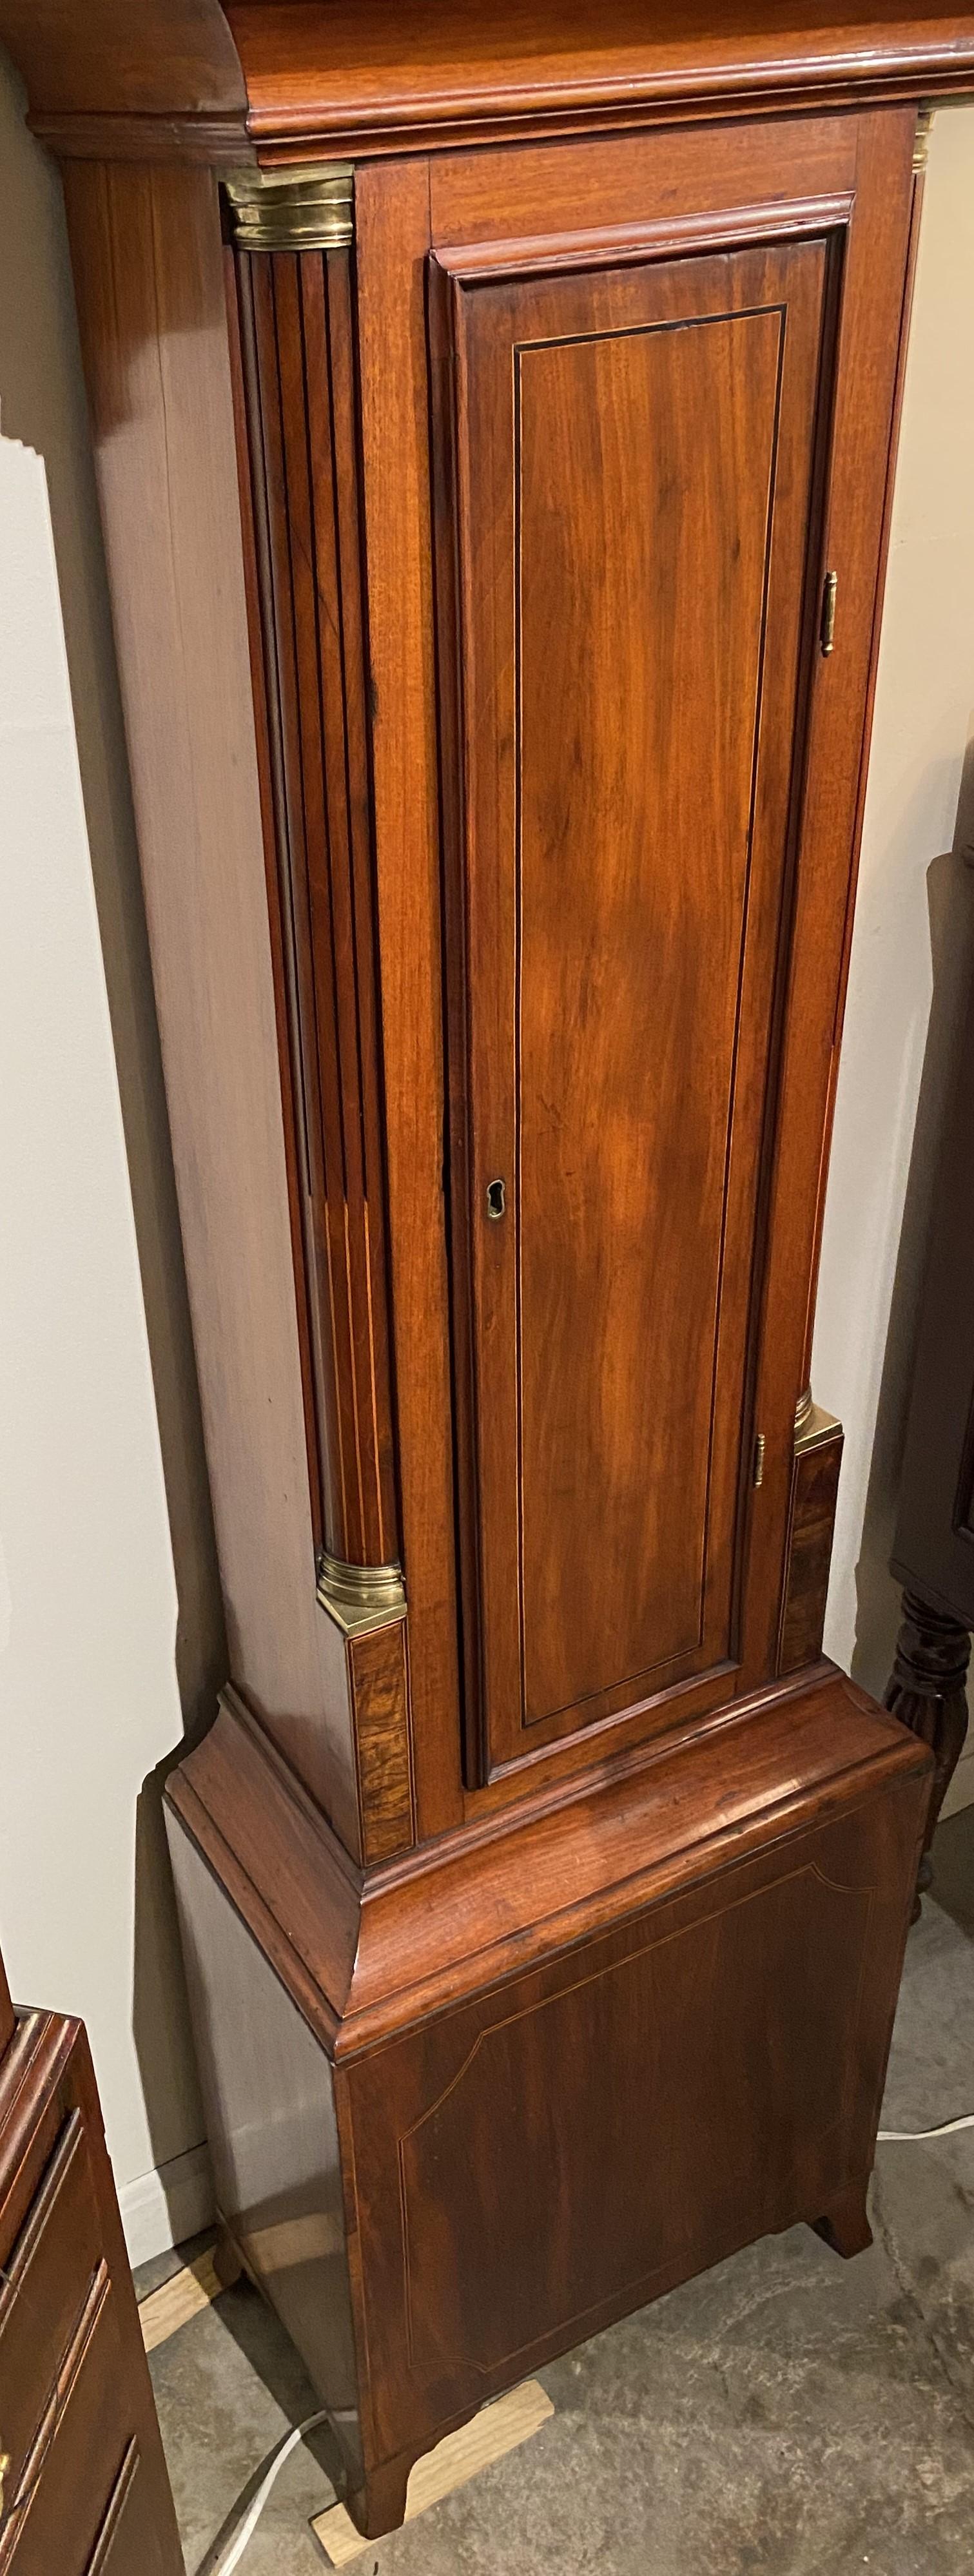 William Cummens Federal Mahogany Tall Clock with Moon Phase Dial circa 1820 For Sale 2